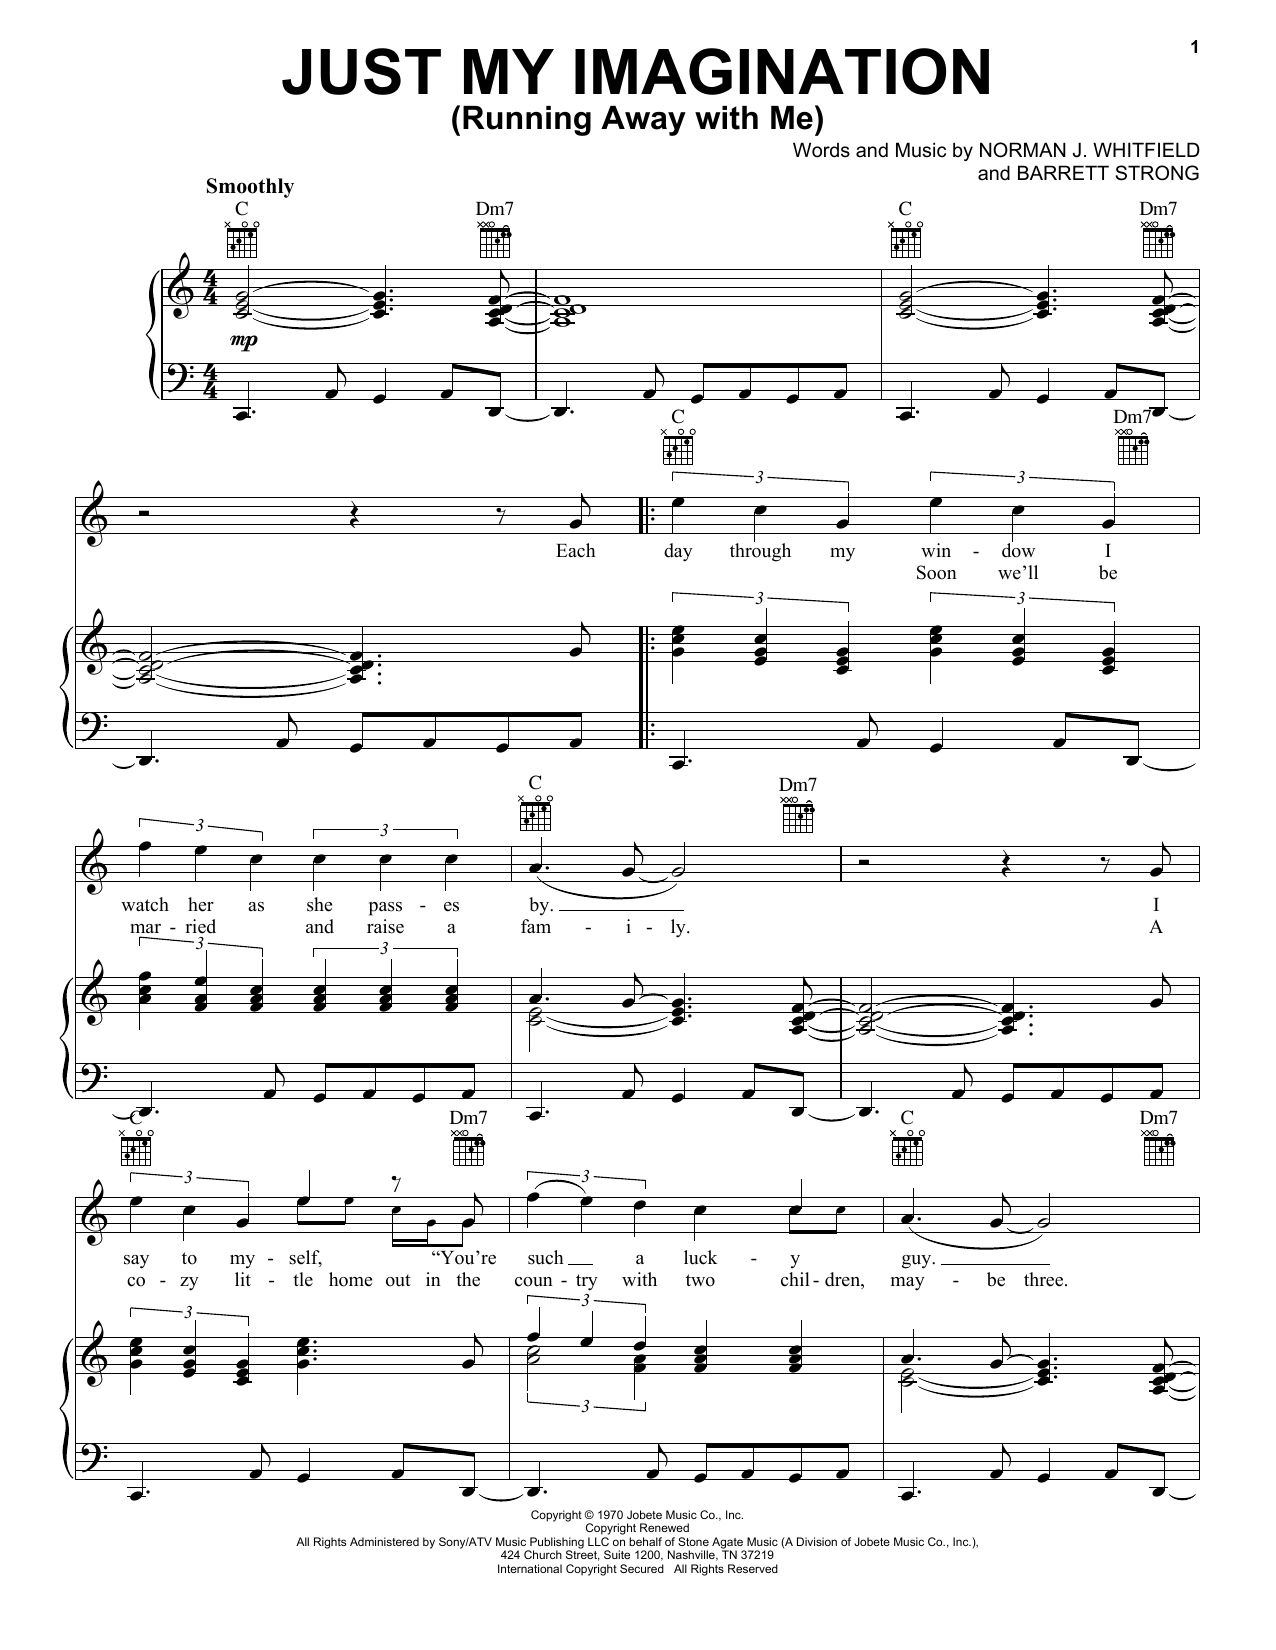 Download The Temptations Just My Imagination (Running Away With Me) sheet music notes and chords for Piano, Vocal & Guitar (Right-Hand Melody) - Download Printable PDF and start playing in minutes.